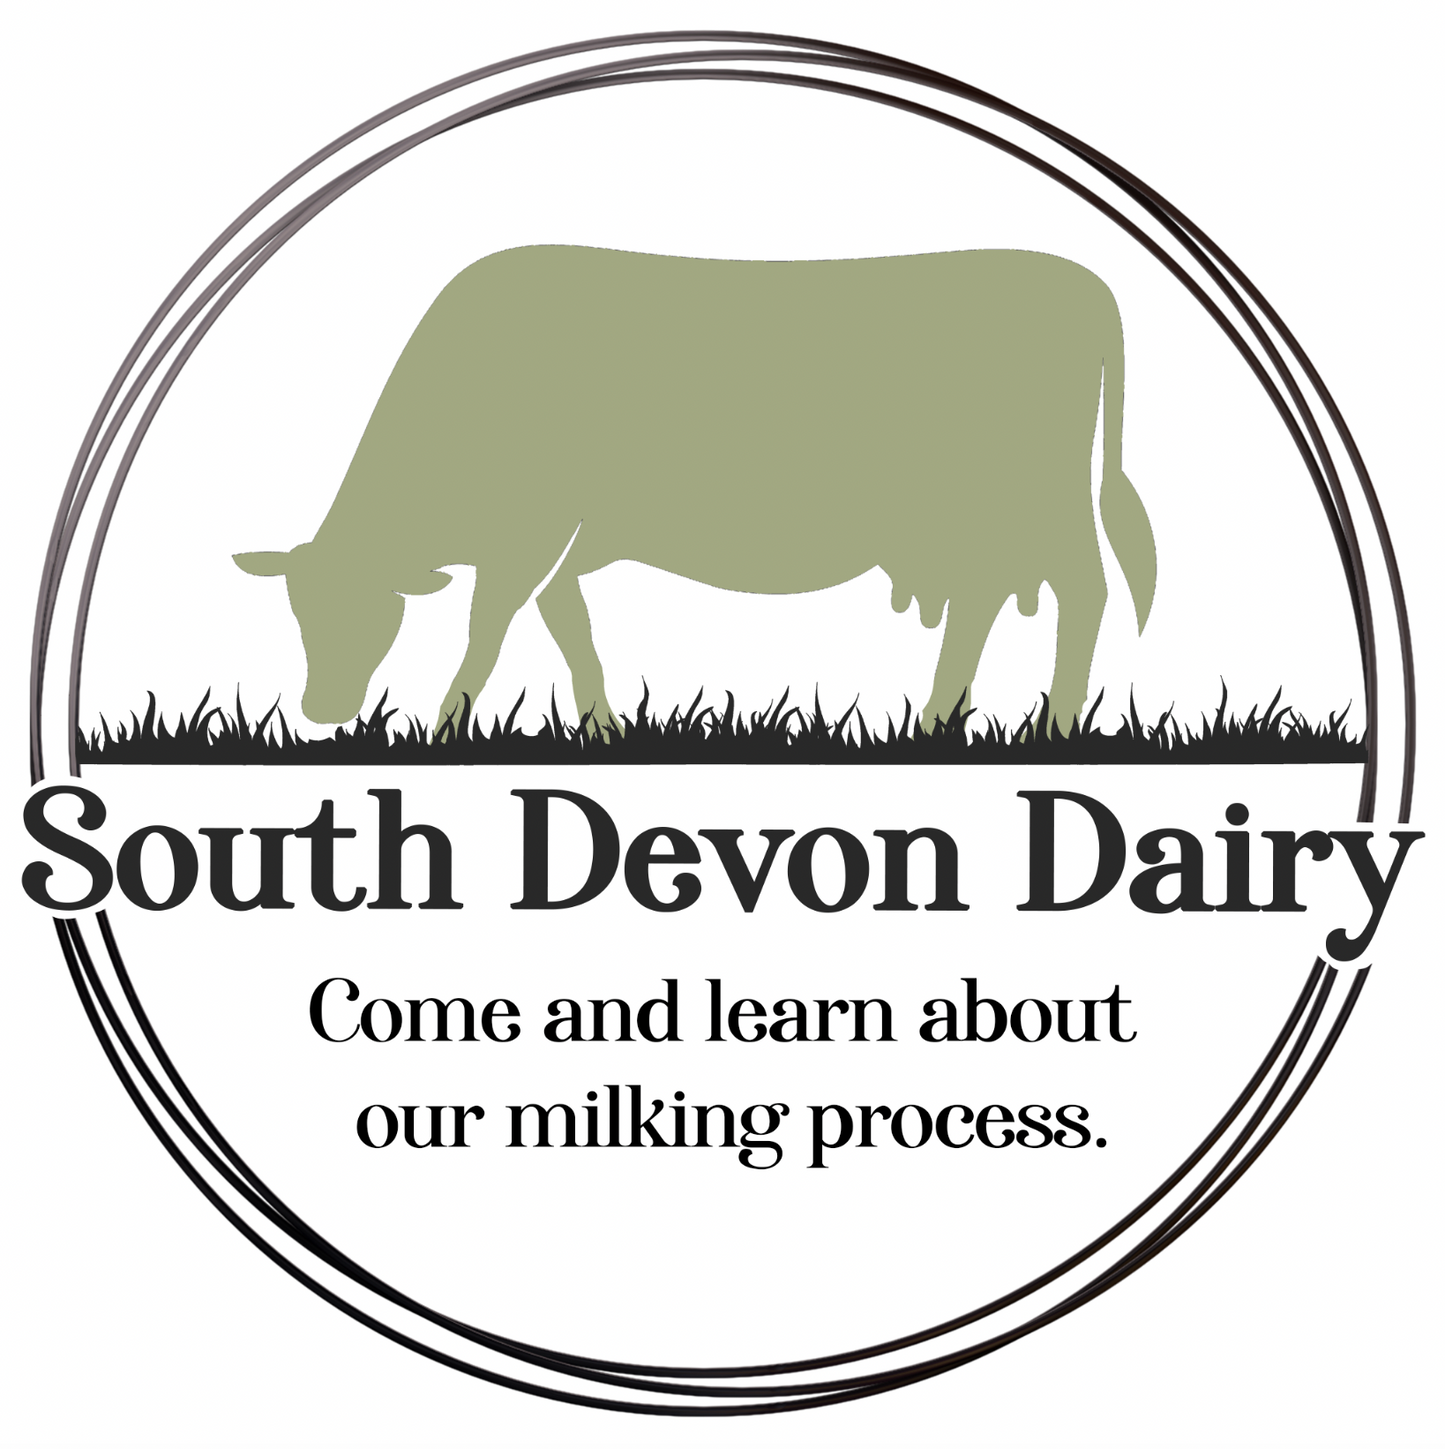 Come and learn about our milking process.